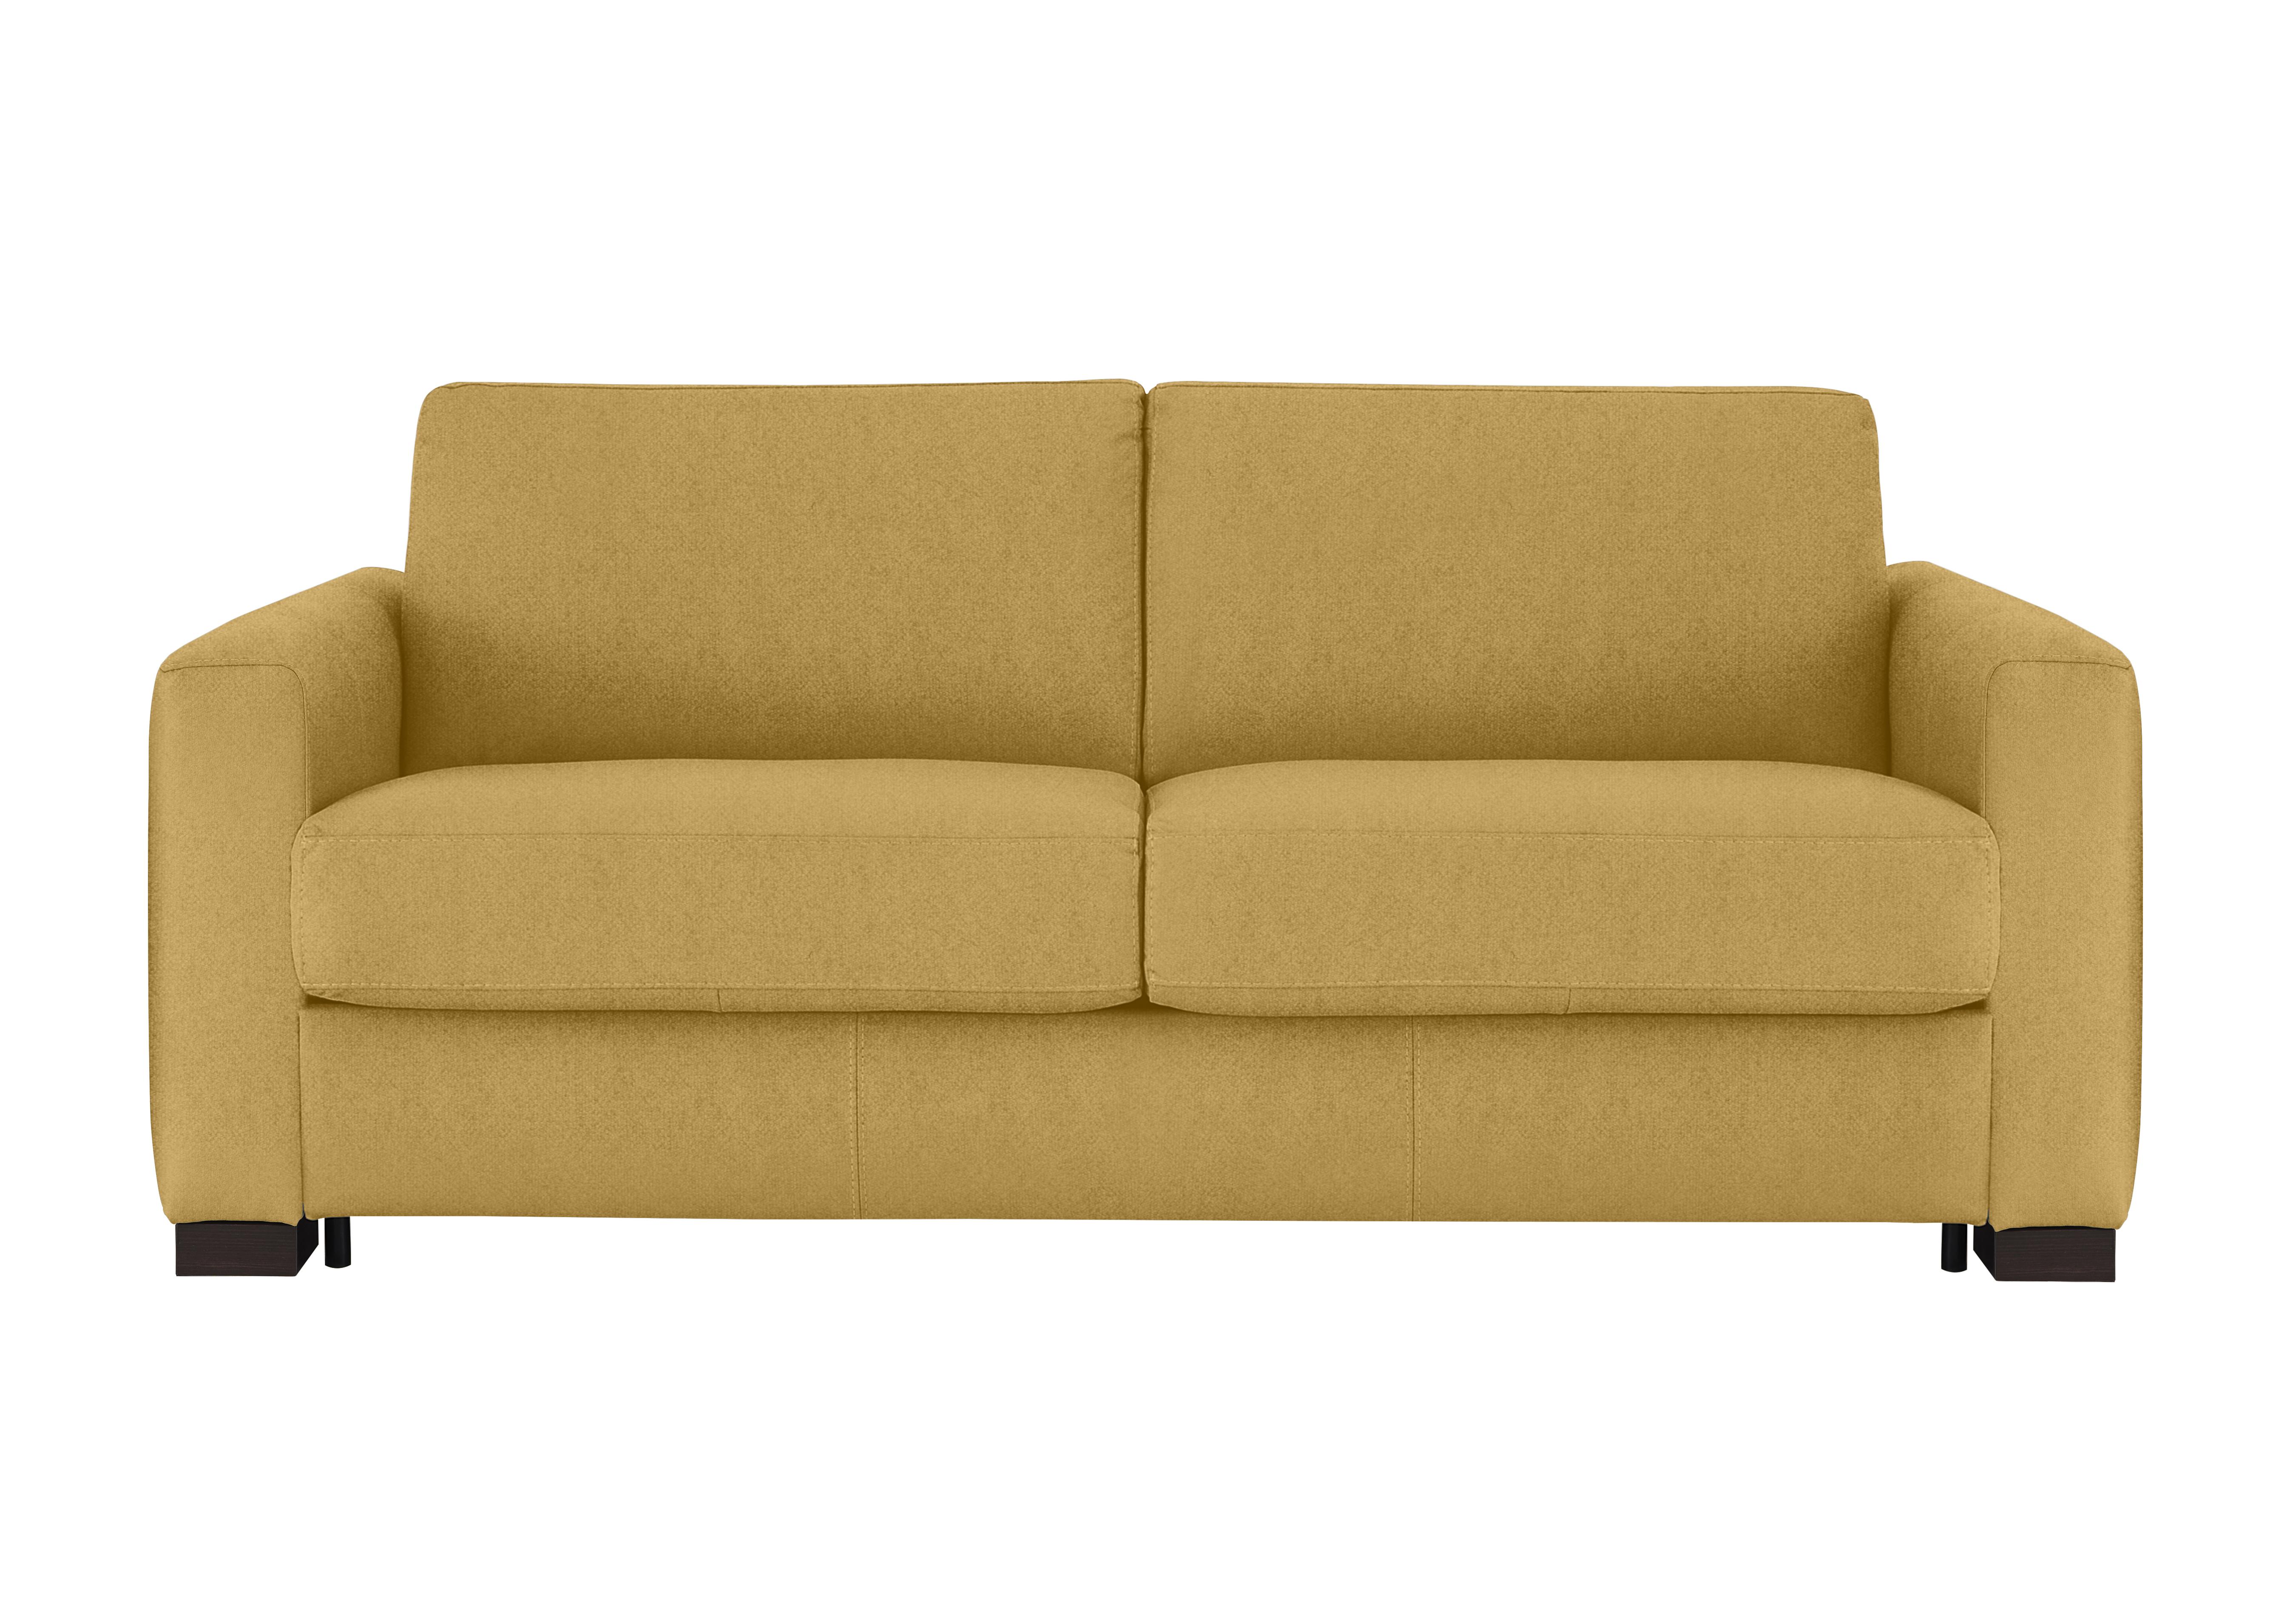 Alcova 3 Seater Fabric Sofa Bed with Box Arms in Fuente Mostaza on Furniture Village